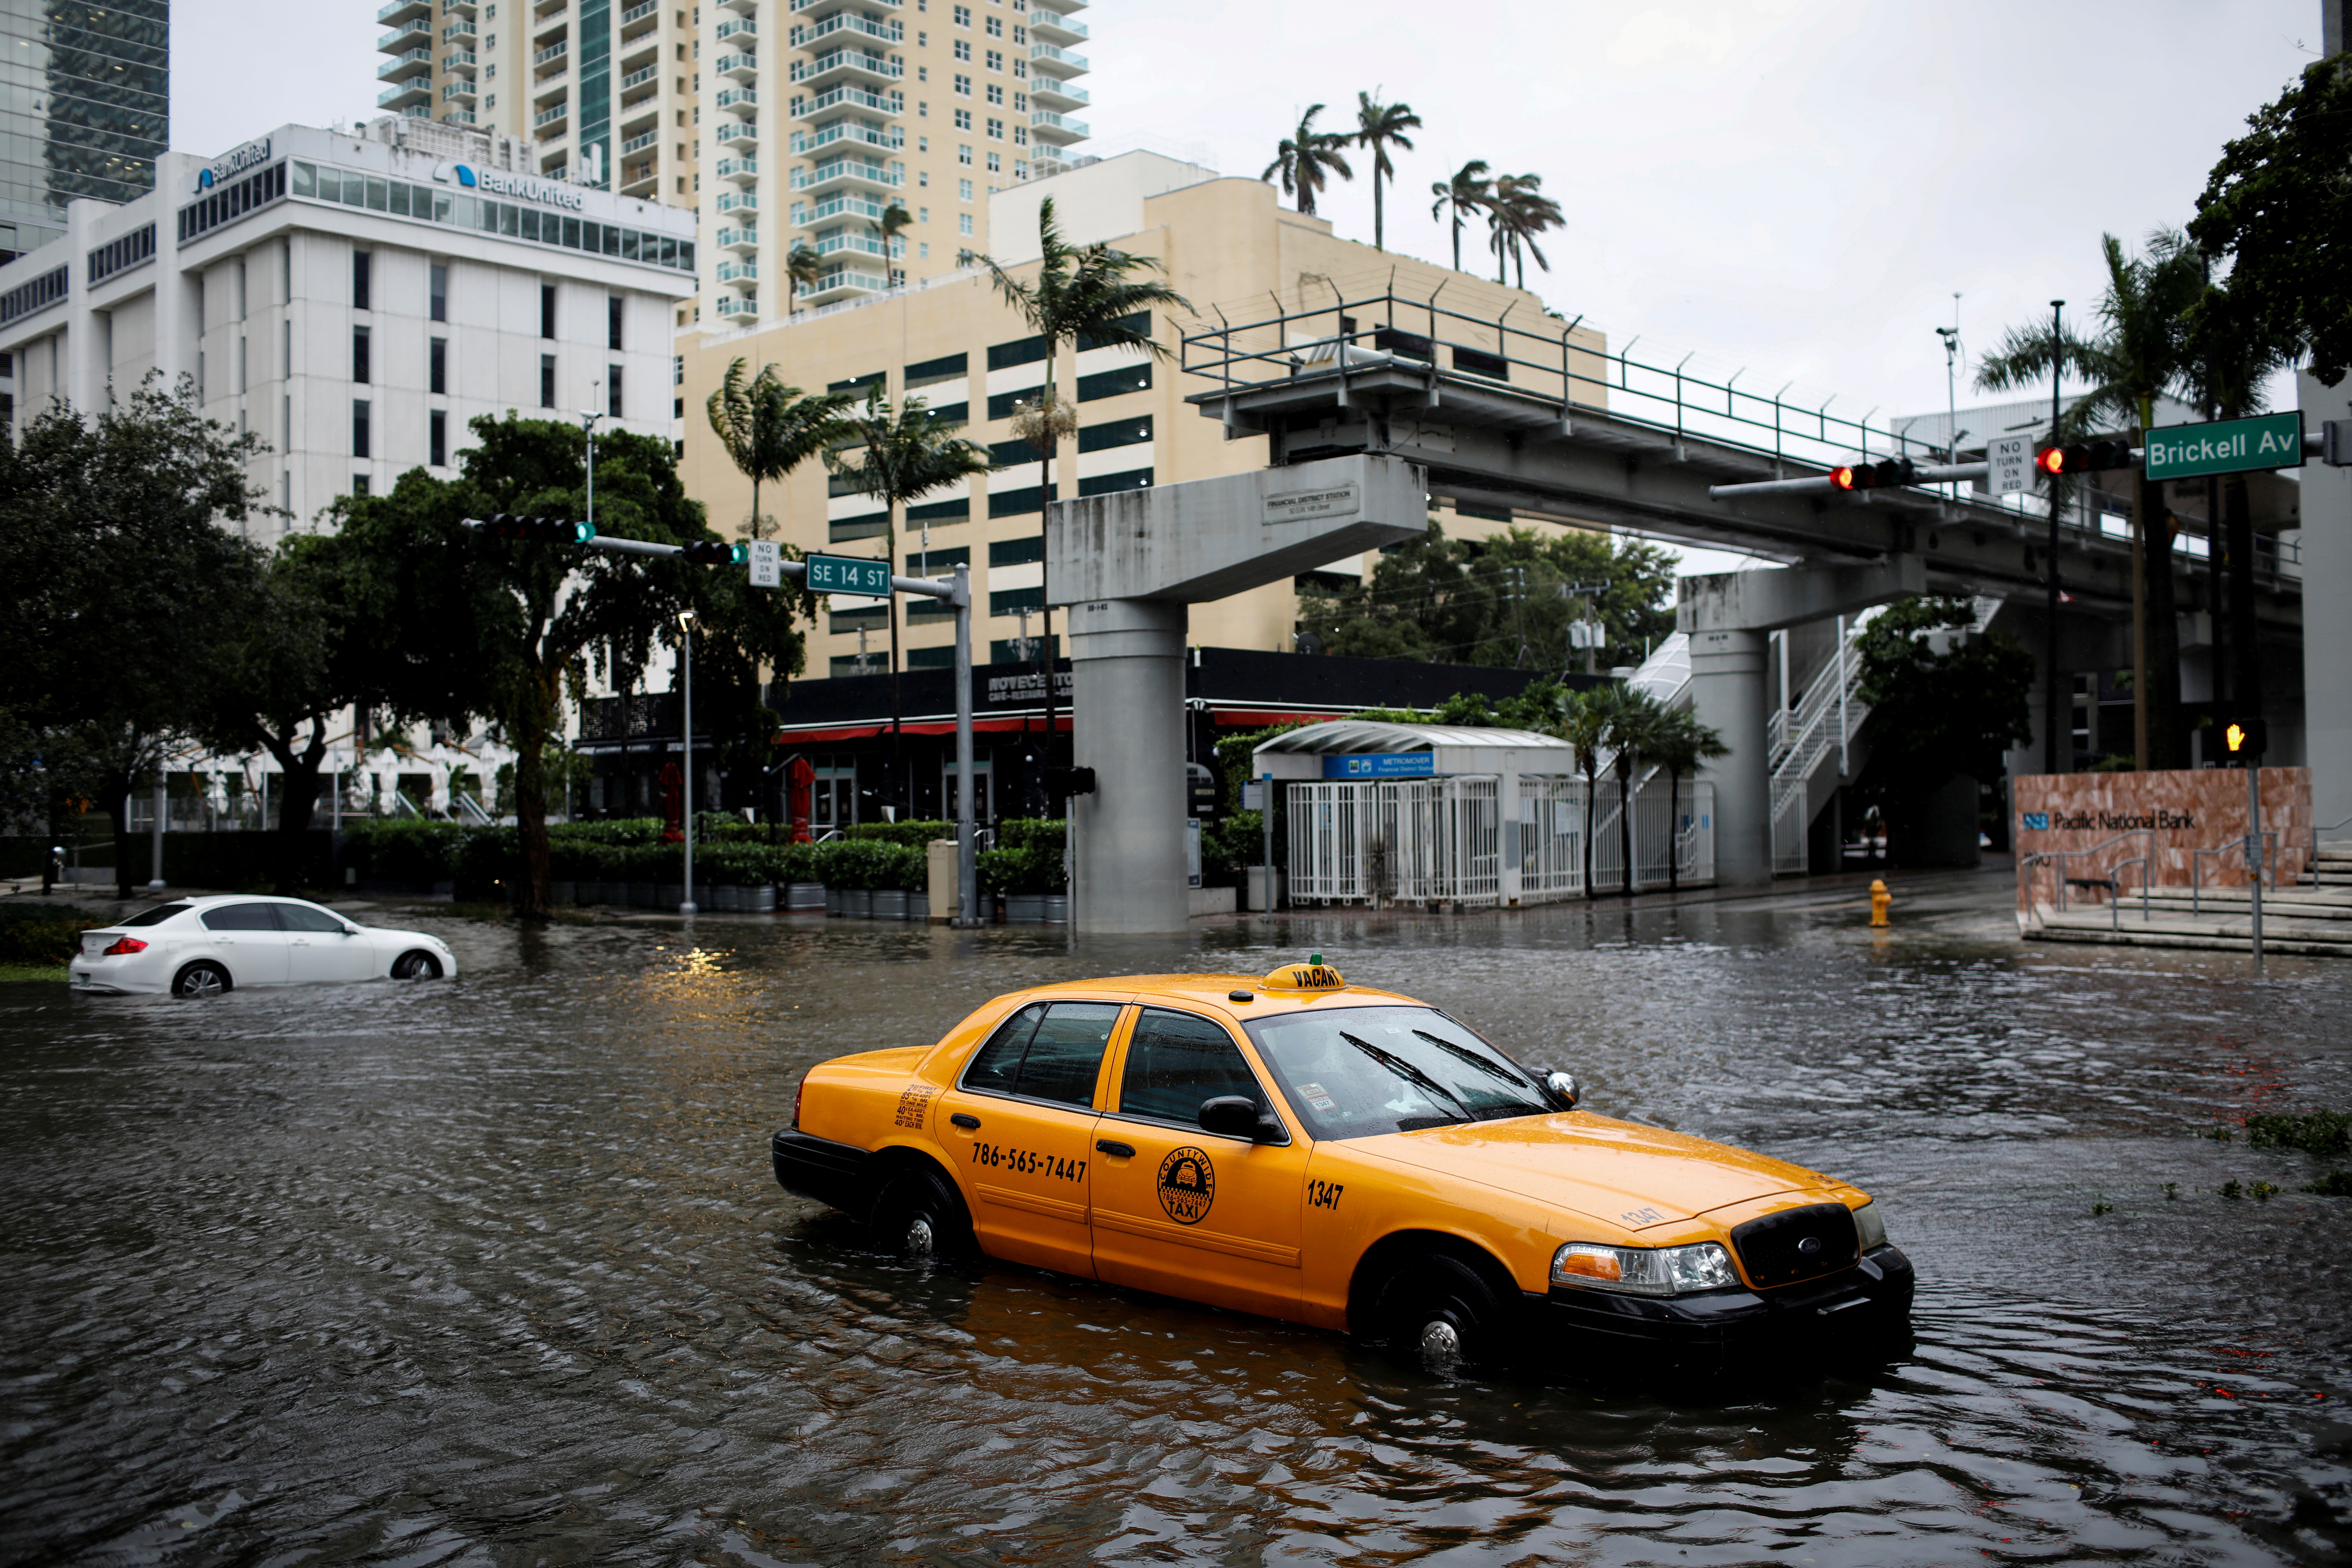 A damaged taxi is seen in floodwaters caused by Tropical Storm Eta in a street at the Brickell neighborhood in Miami